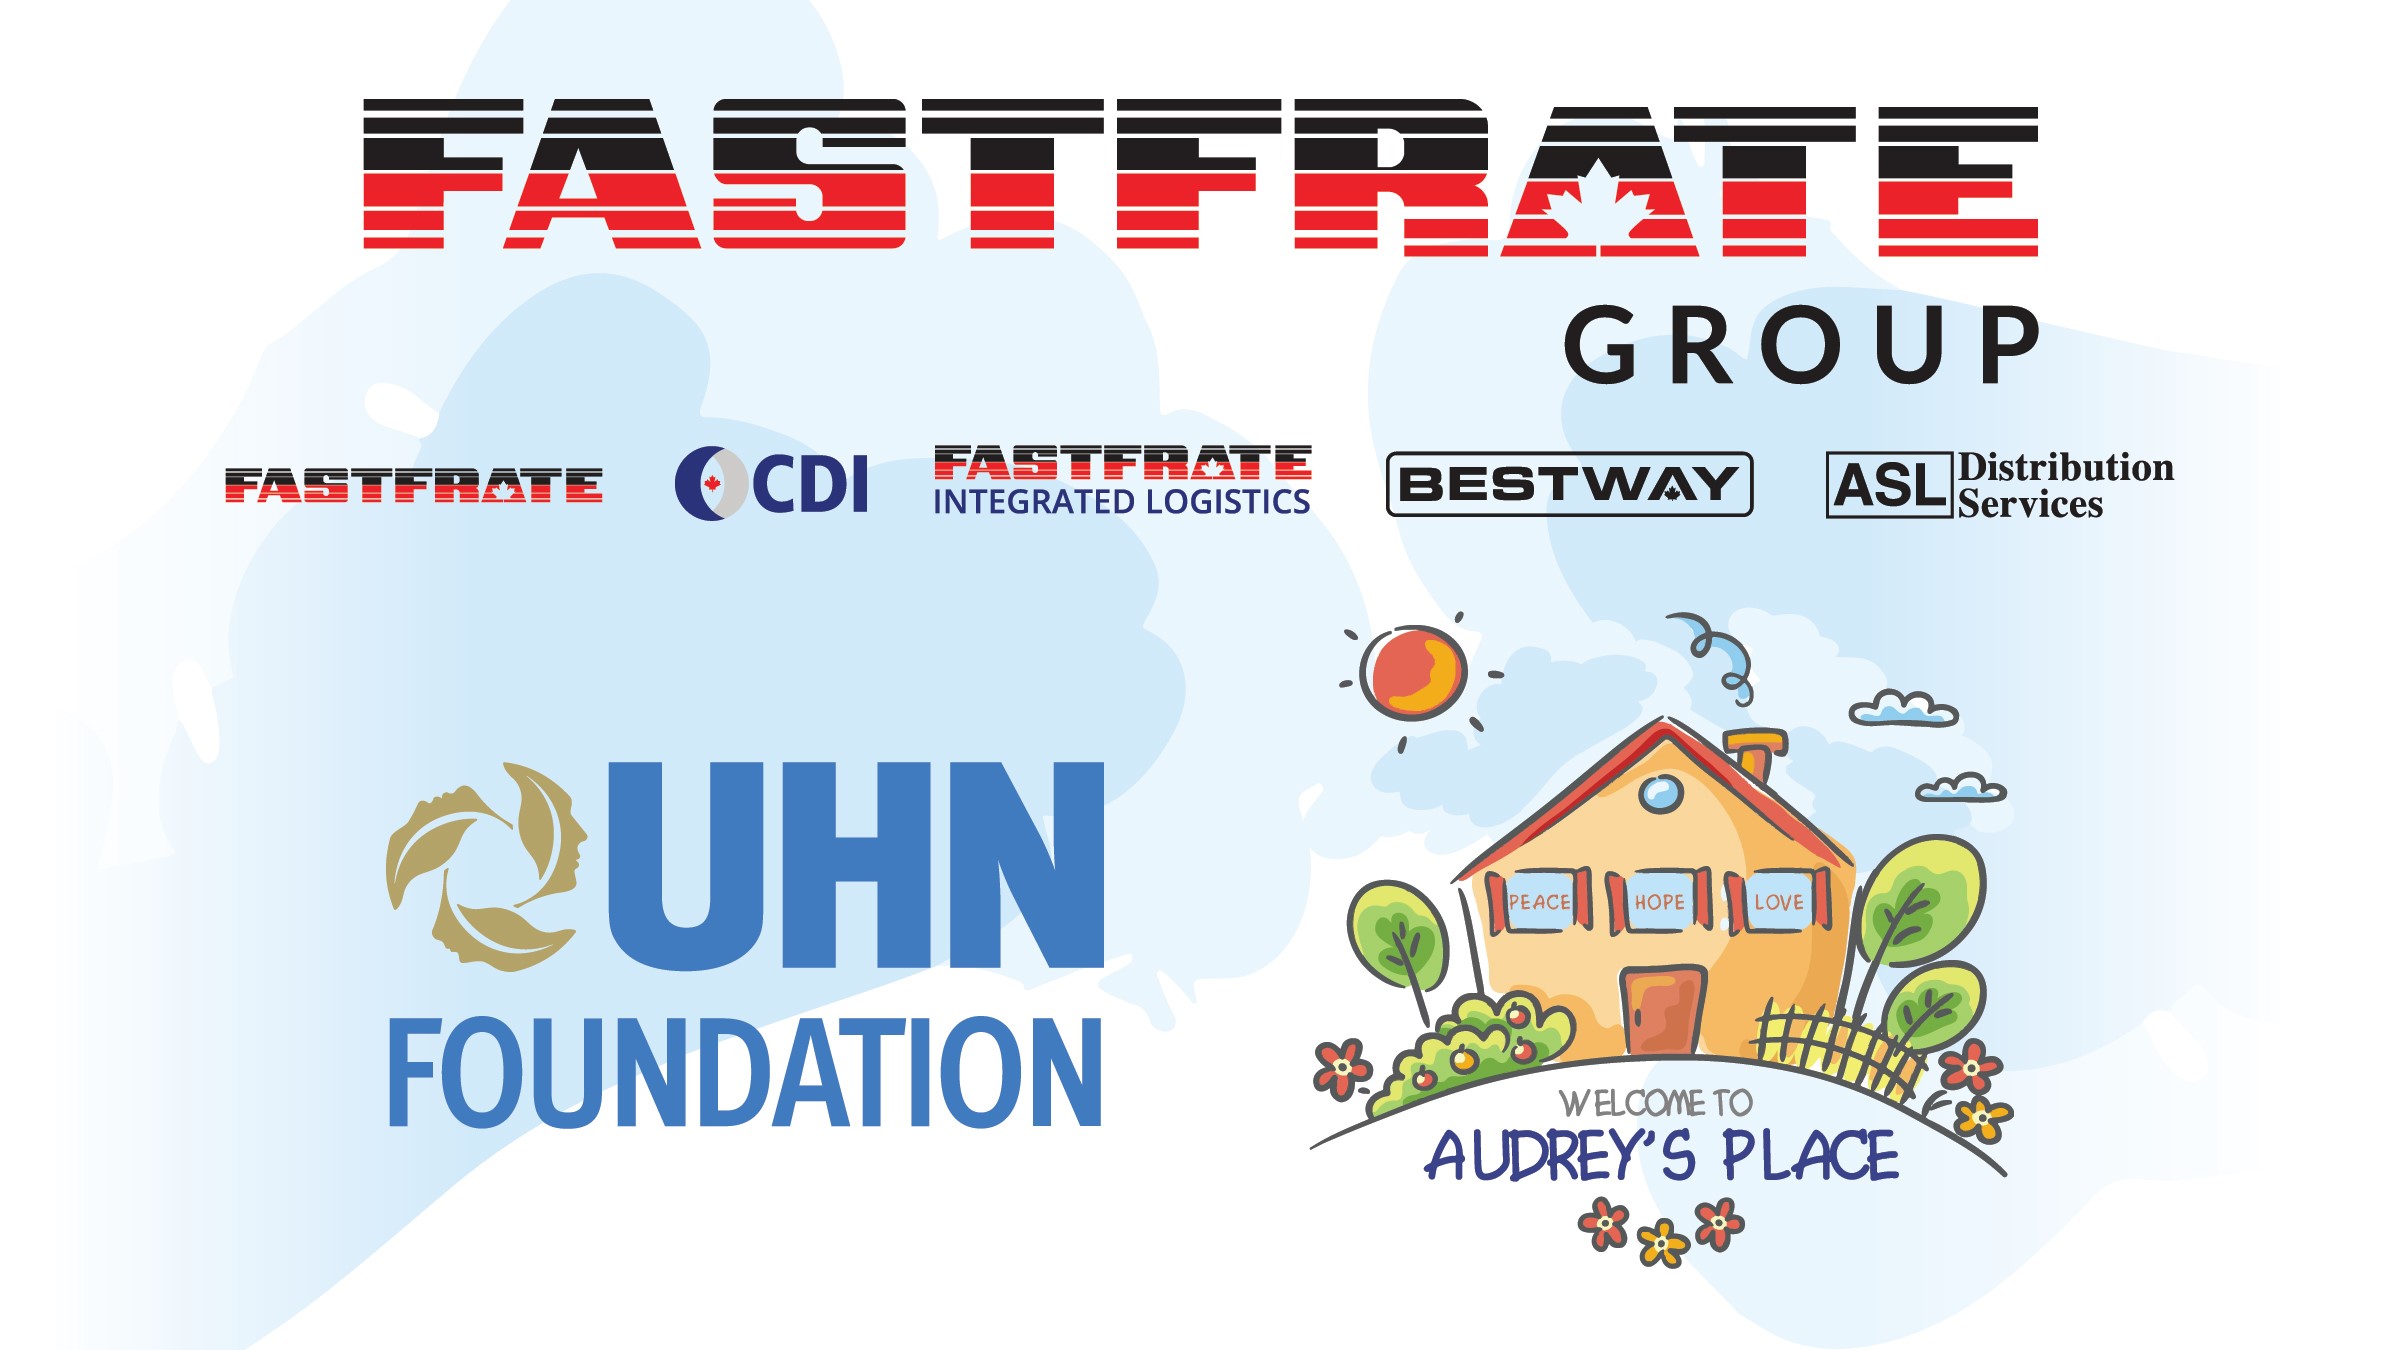 Fastfrate Group logos above UHN Foundation logo and drawing of house with Audrey's Place logo